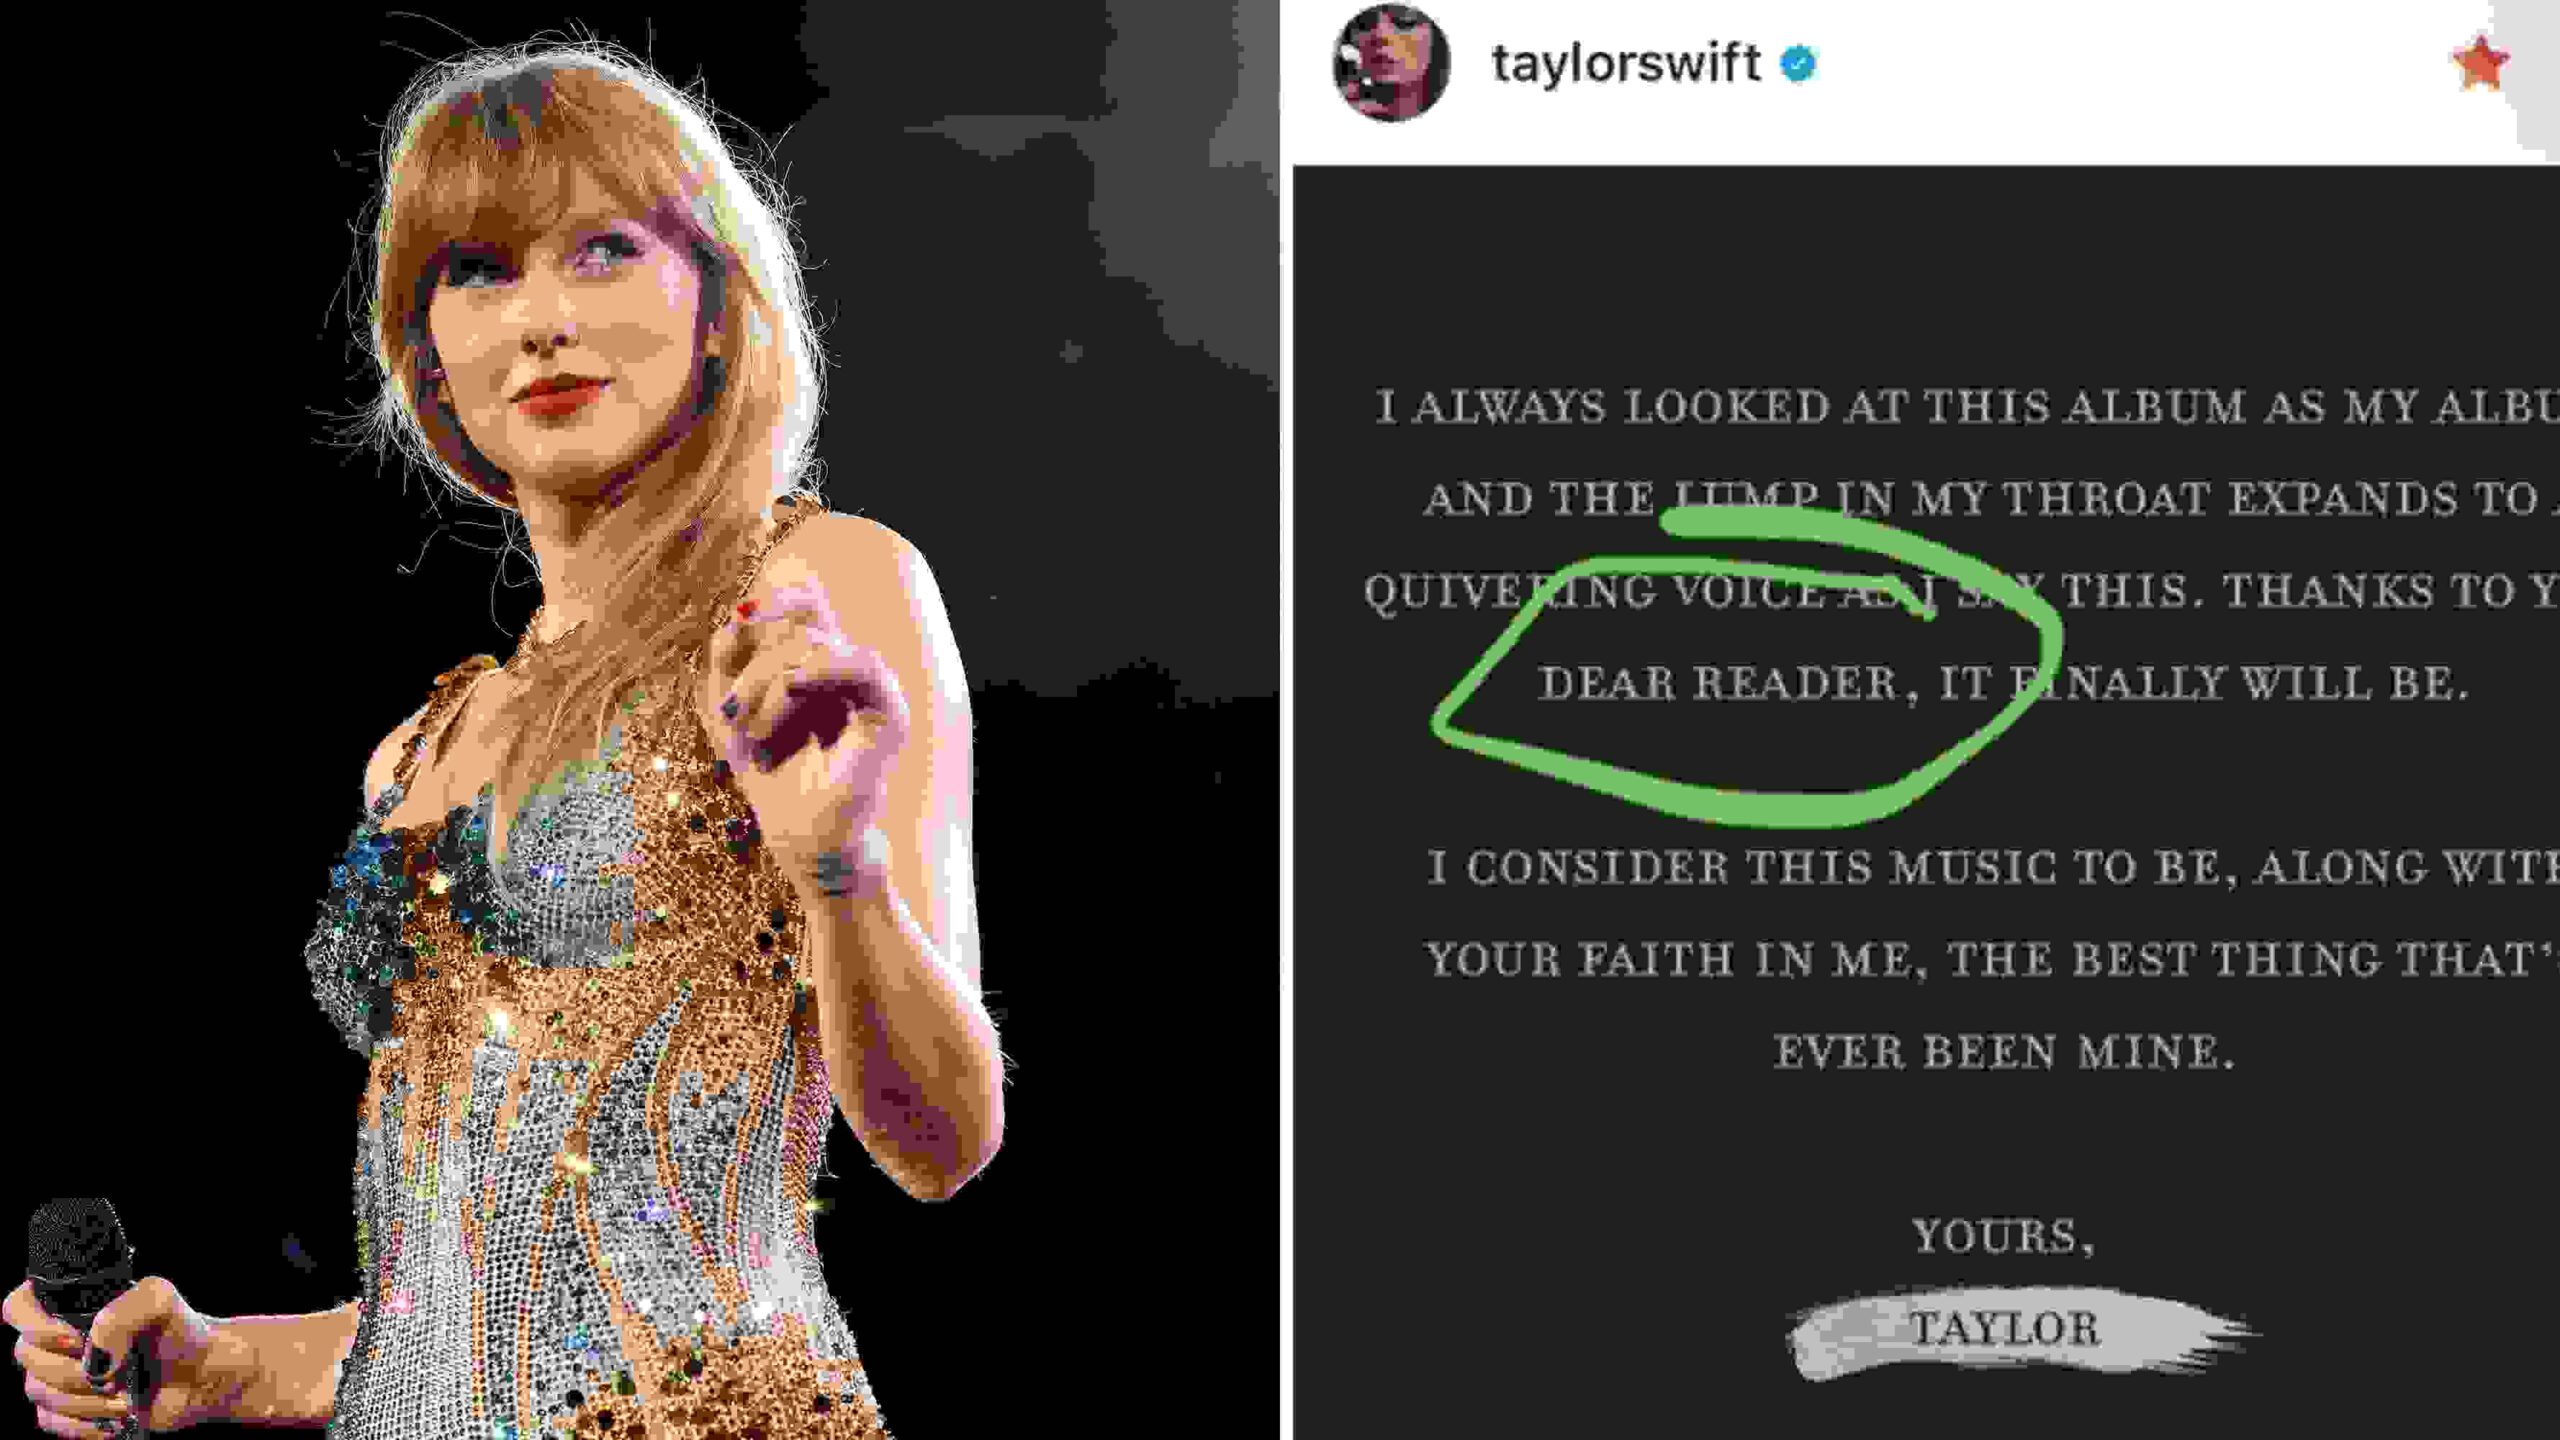 Grammy Awards Taylor Swift announces new album The Tortured Poets Department at the Grammys